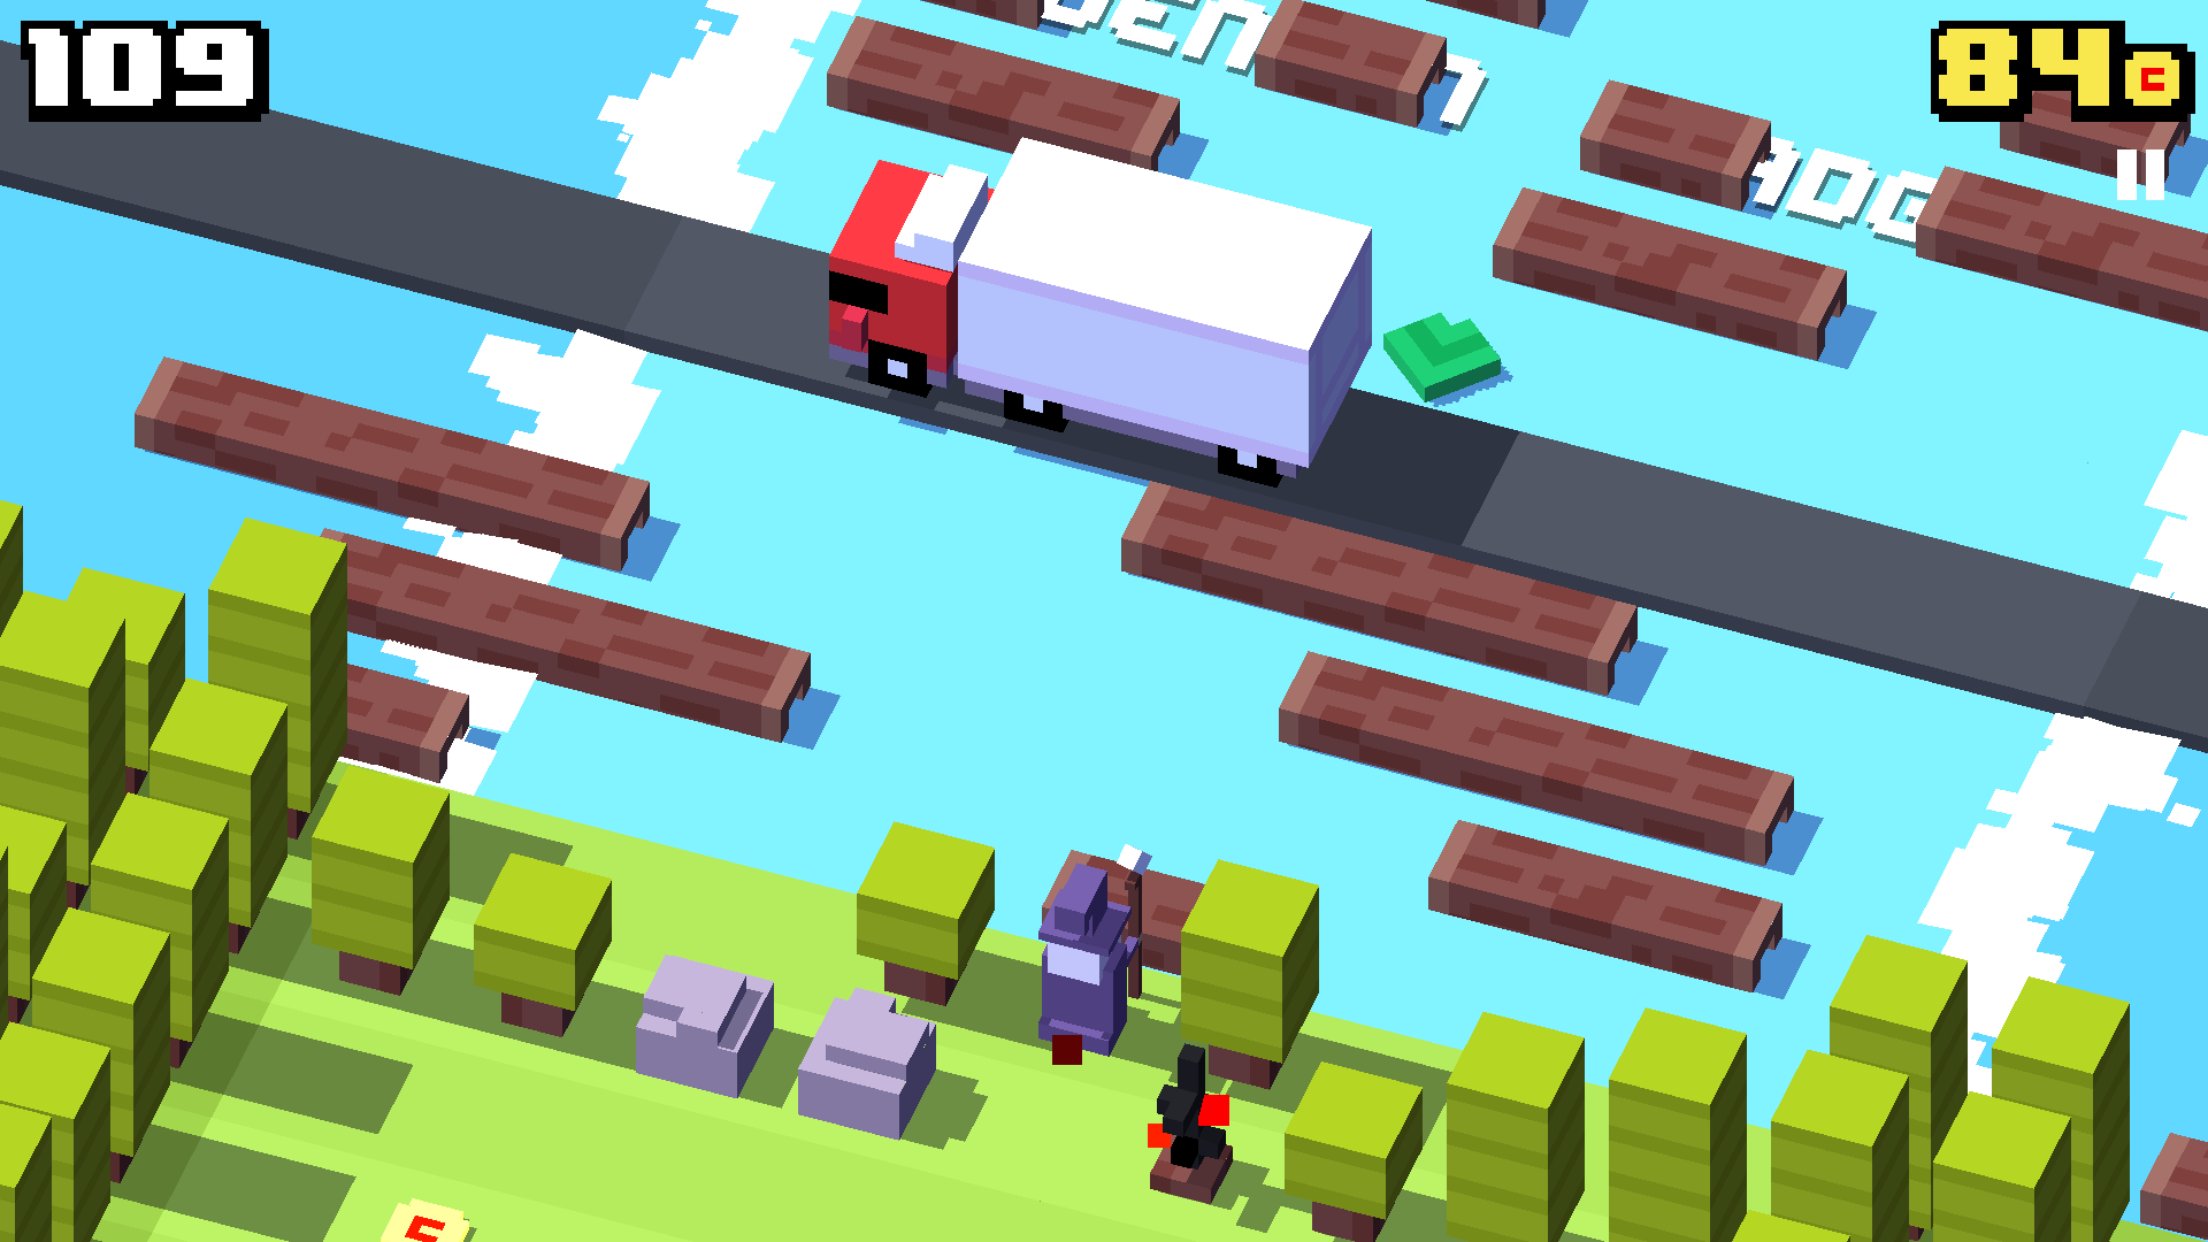 world record for highest score on crossy road